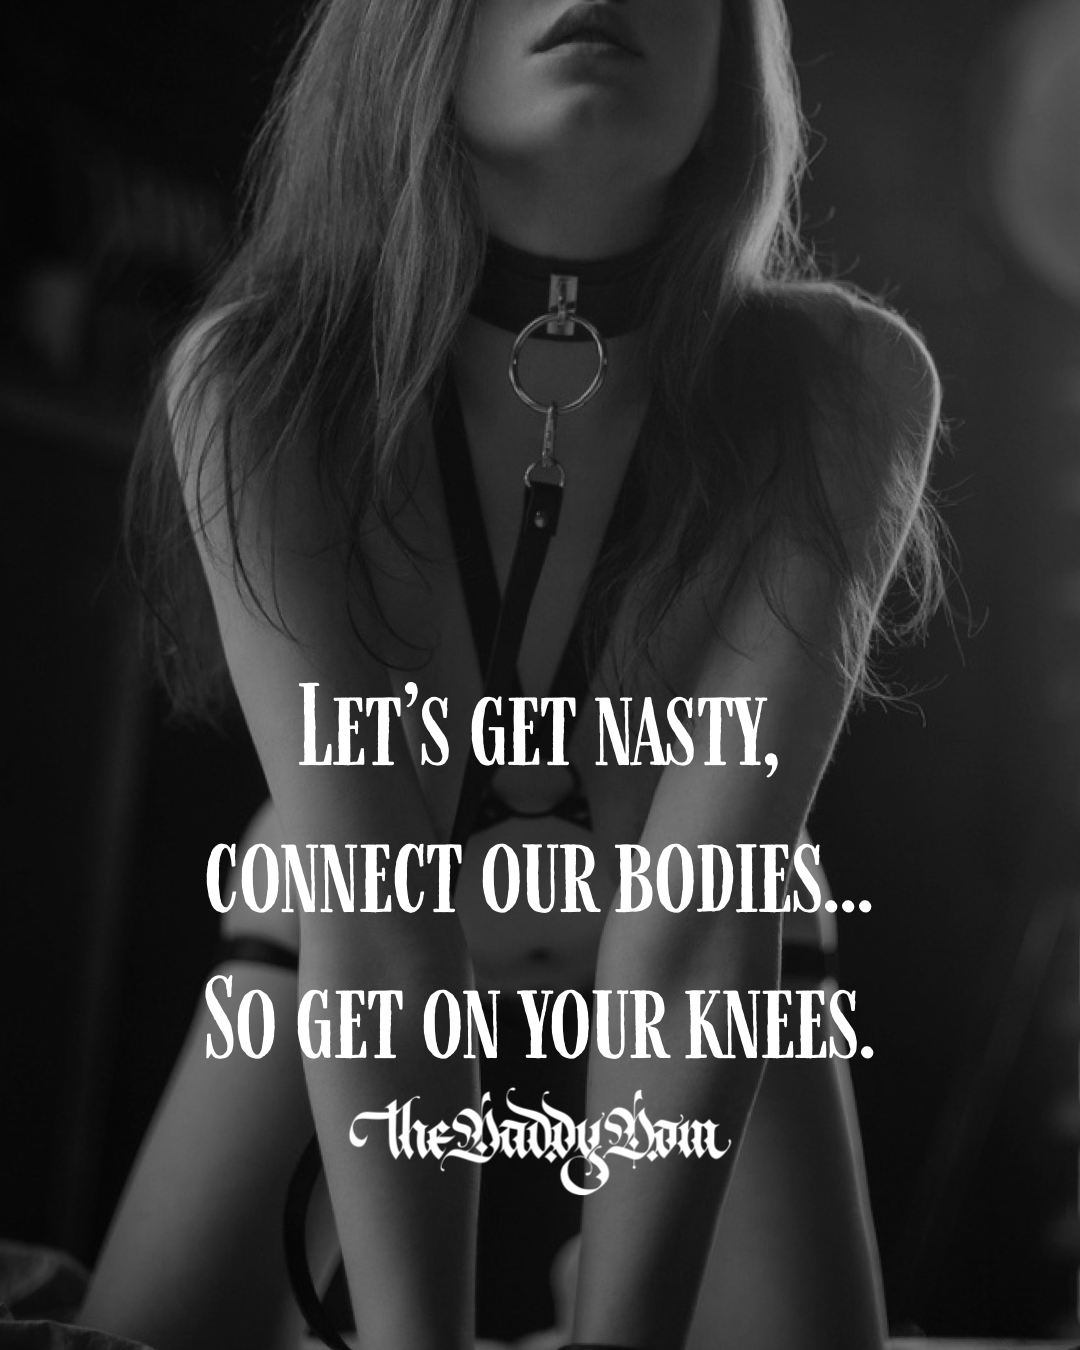 the-daddy-dom:✔️Daily dose of BDSM 🖤🎩➖➖➖➖➖➖➖➖➖➖➖➖➖➖➖➖✔️